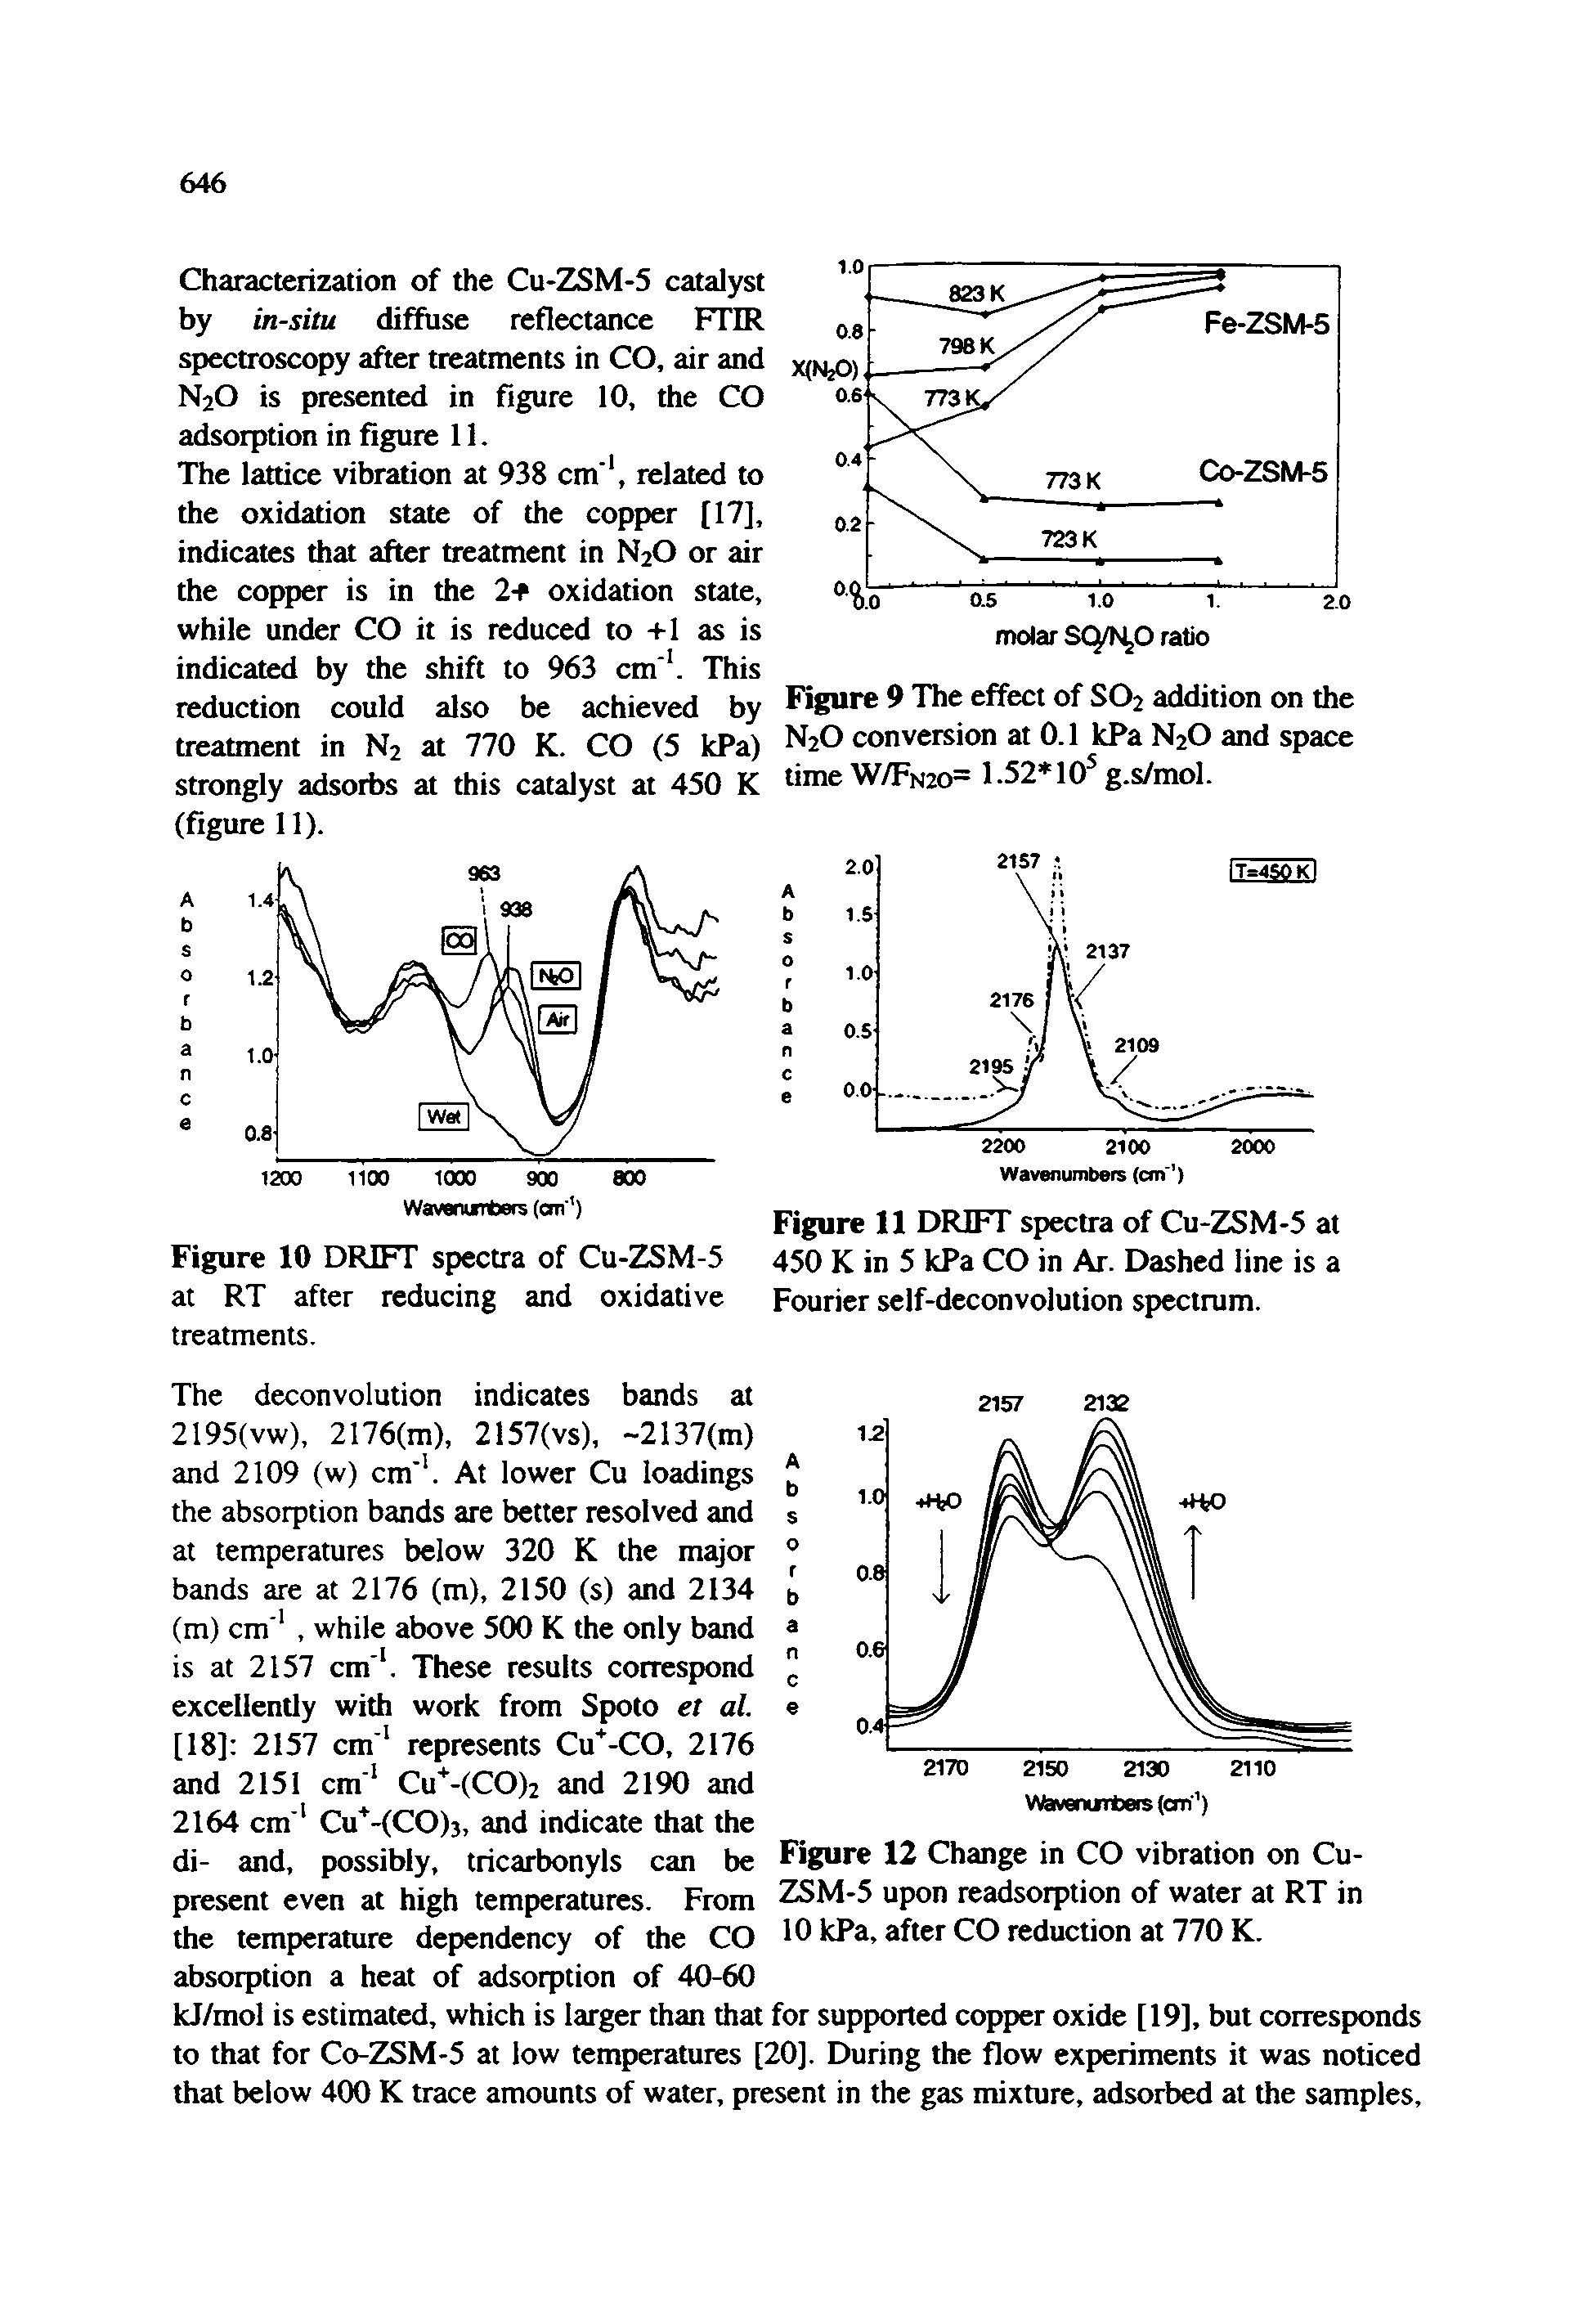 Figure 10 DRIFT spectra of Cu-ZSM-5 at RT after reducing and oxidative treatments.